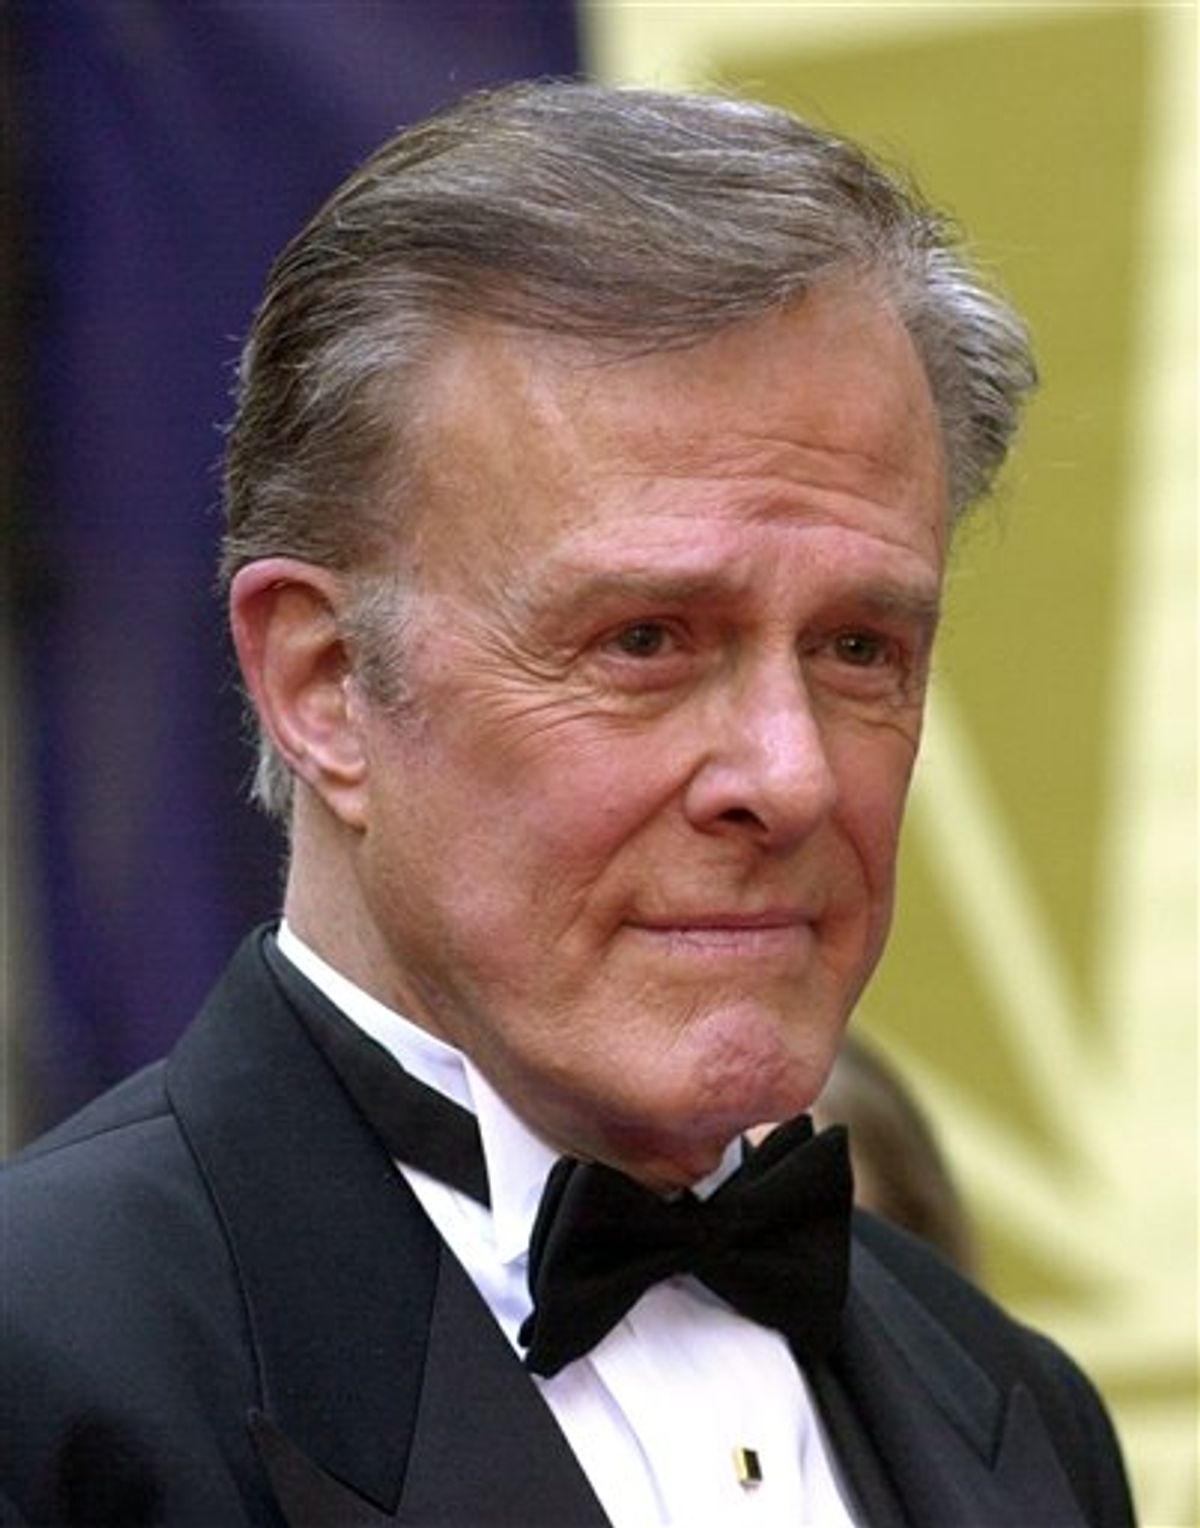 FILE - This May 5, 2002 file photo shows Robert Culp arriving at NBC's 75th anniversary celebration in New York.  Culp, the versatile actor who teamed with Bill Cosby in the groundbreaking comedy-adventure TV series "I Spy" and was Bob in the critically acclaimed sex comedy "Bob &amp; Carol &amp; Ted &amp; Alice,"  died Wednesday March 24, 2010. He was 79. (AP Photo/Ron Frehm, file) (AP)